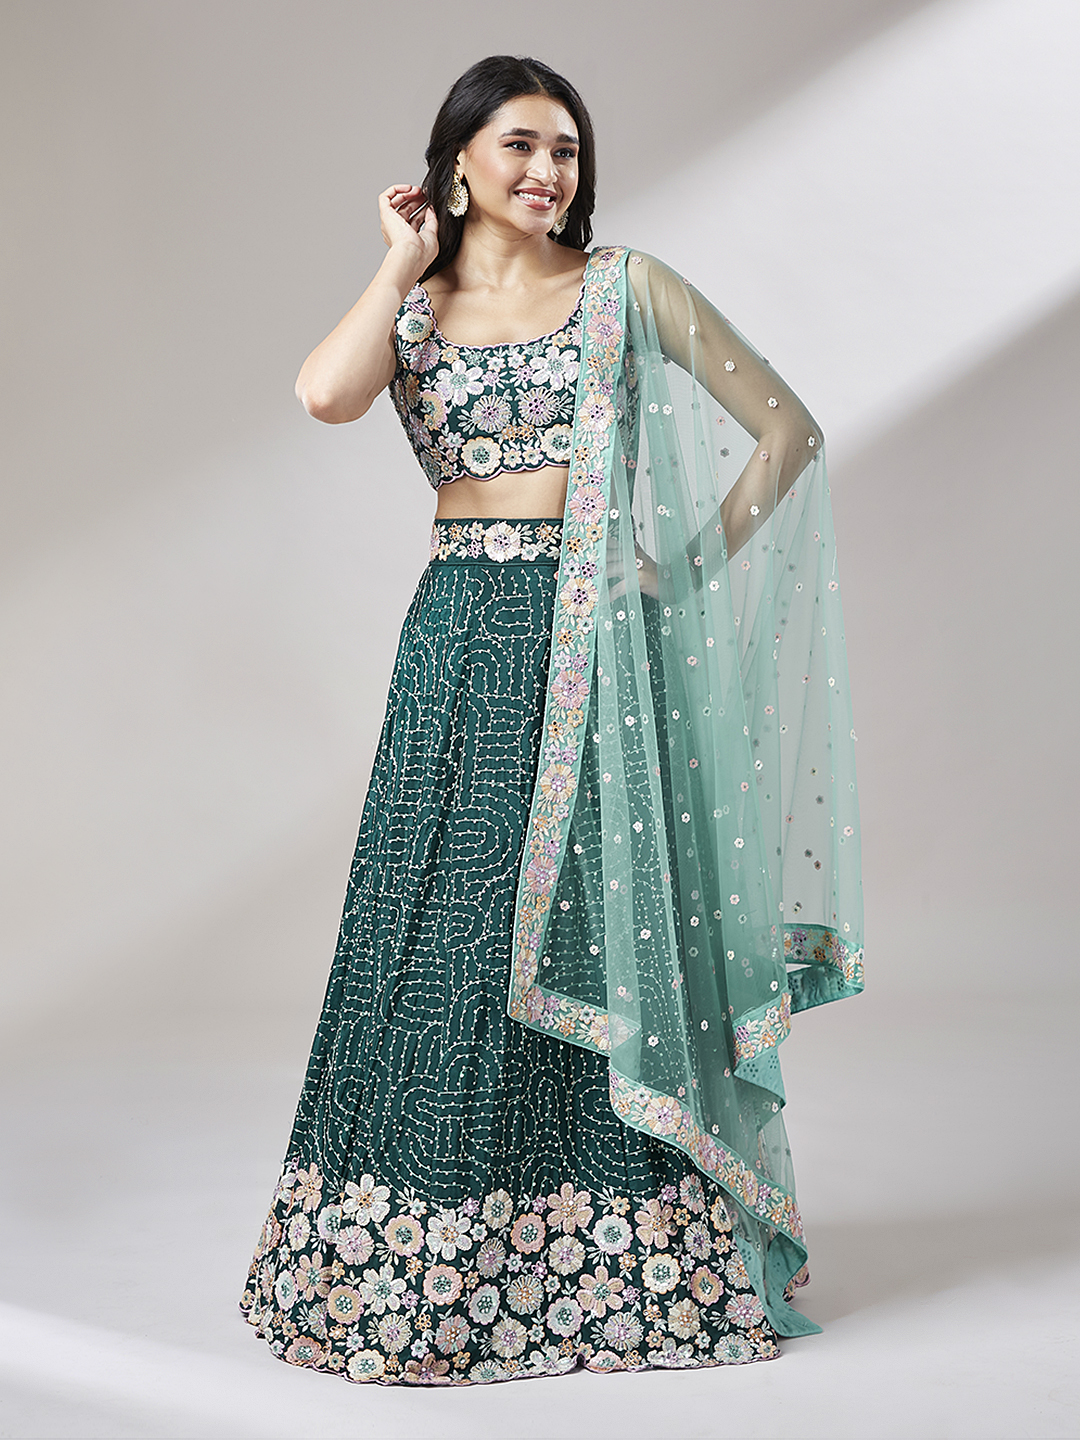 White Floral Pattern Georgette Lehenga Choli with Sequins, Thread, Beads  Work and Dupatta | Exotic India Art